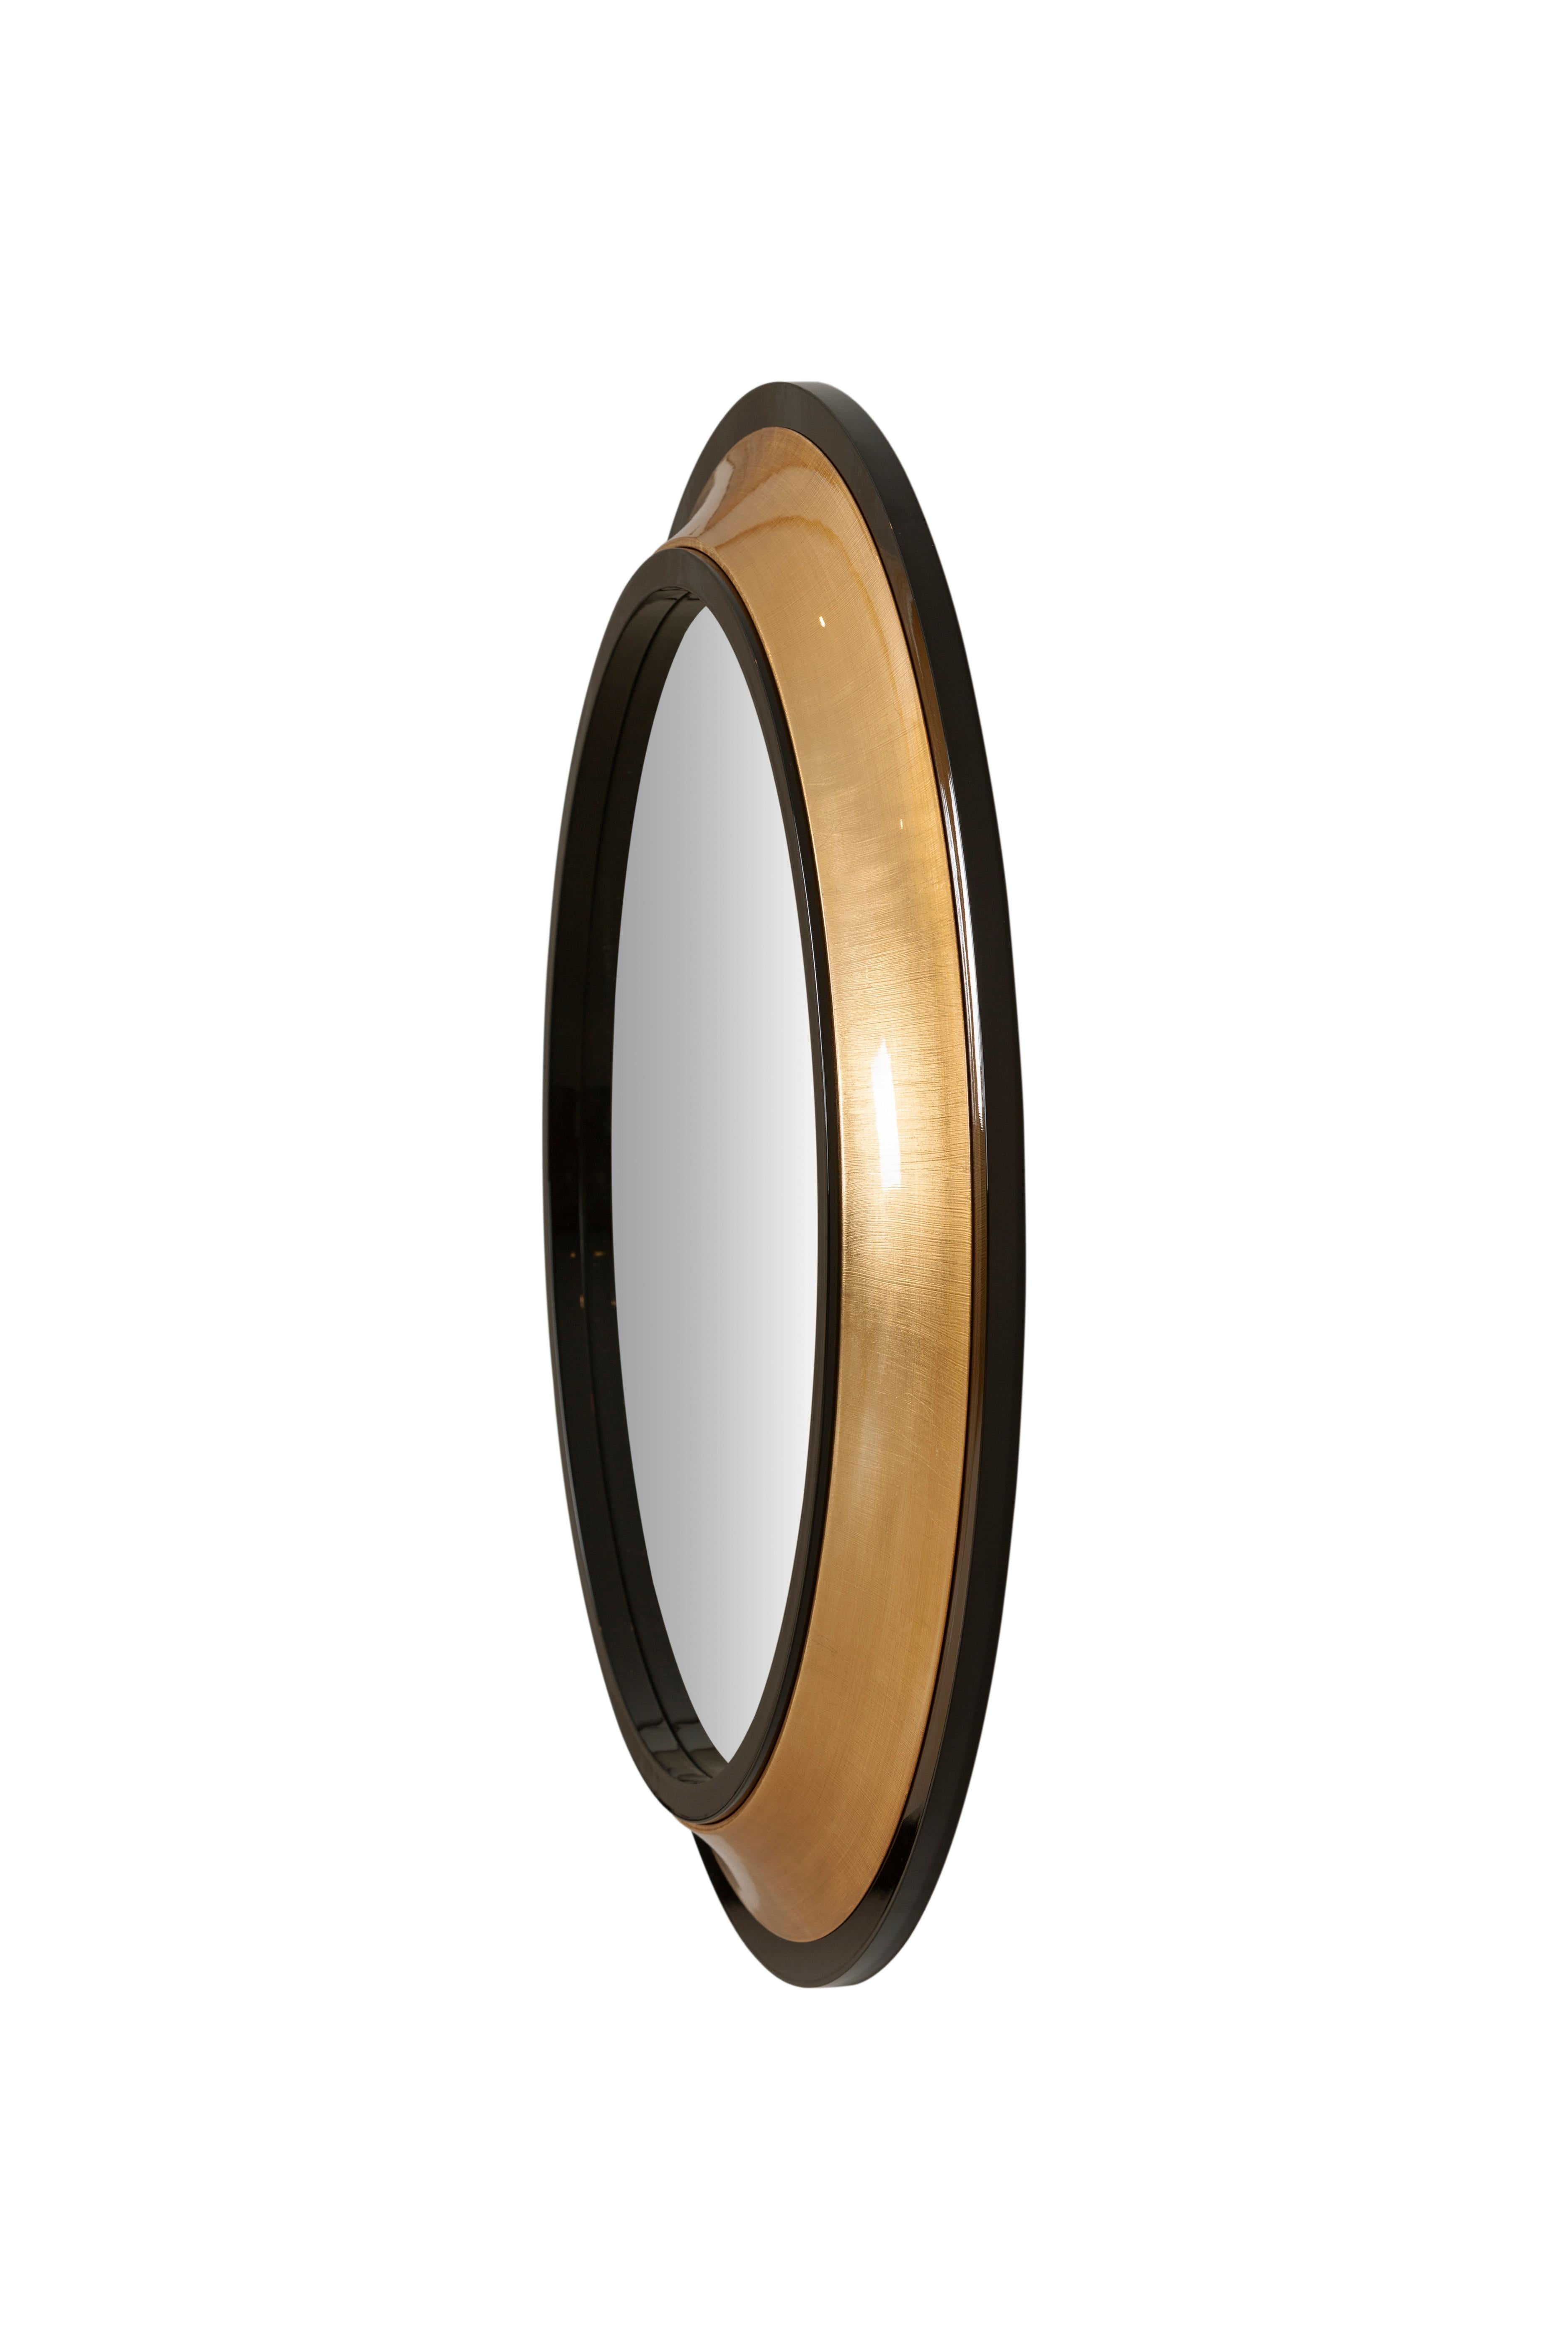 Portuguese Modern Grifo Wall Mirror Gold Leaf Handmade in Portugal by Greenapple For Sale